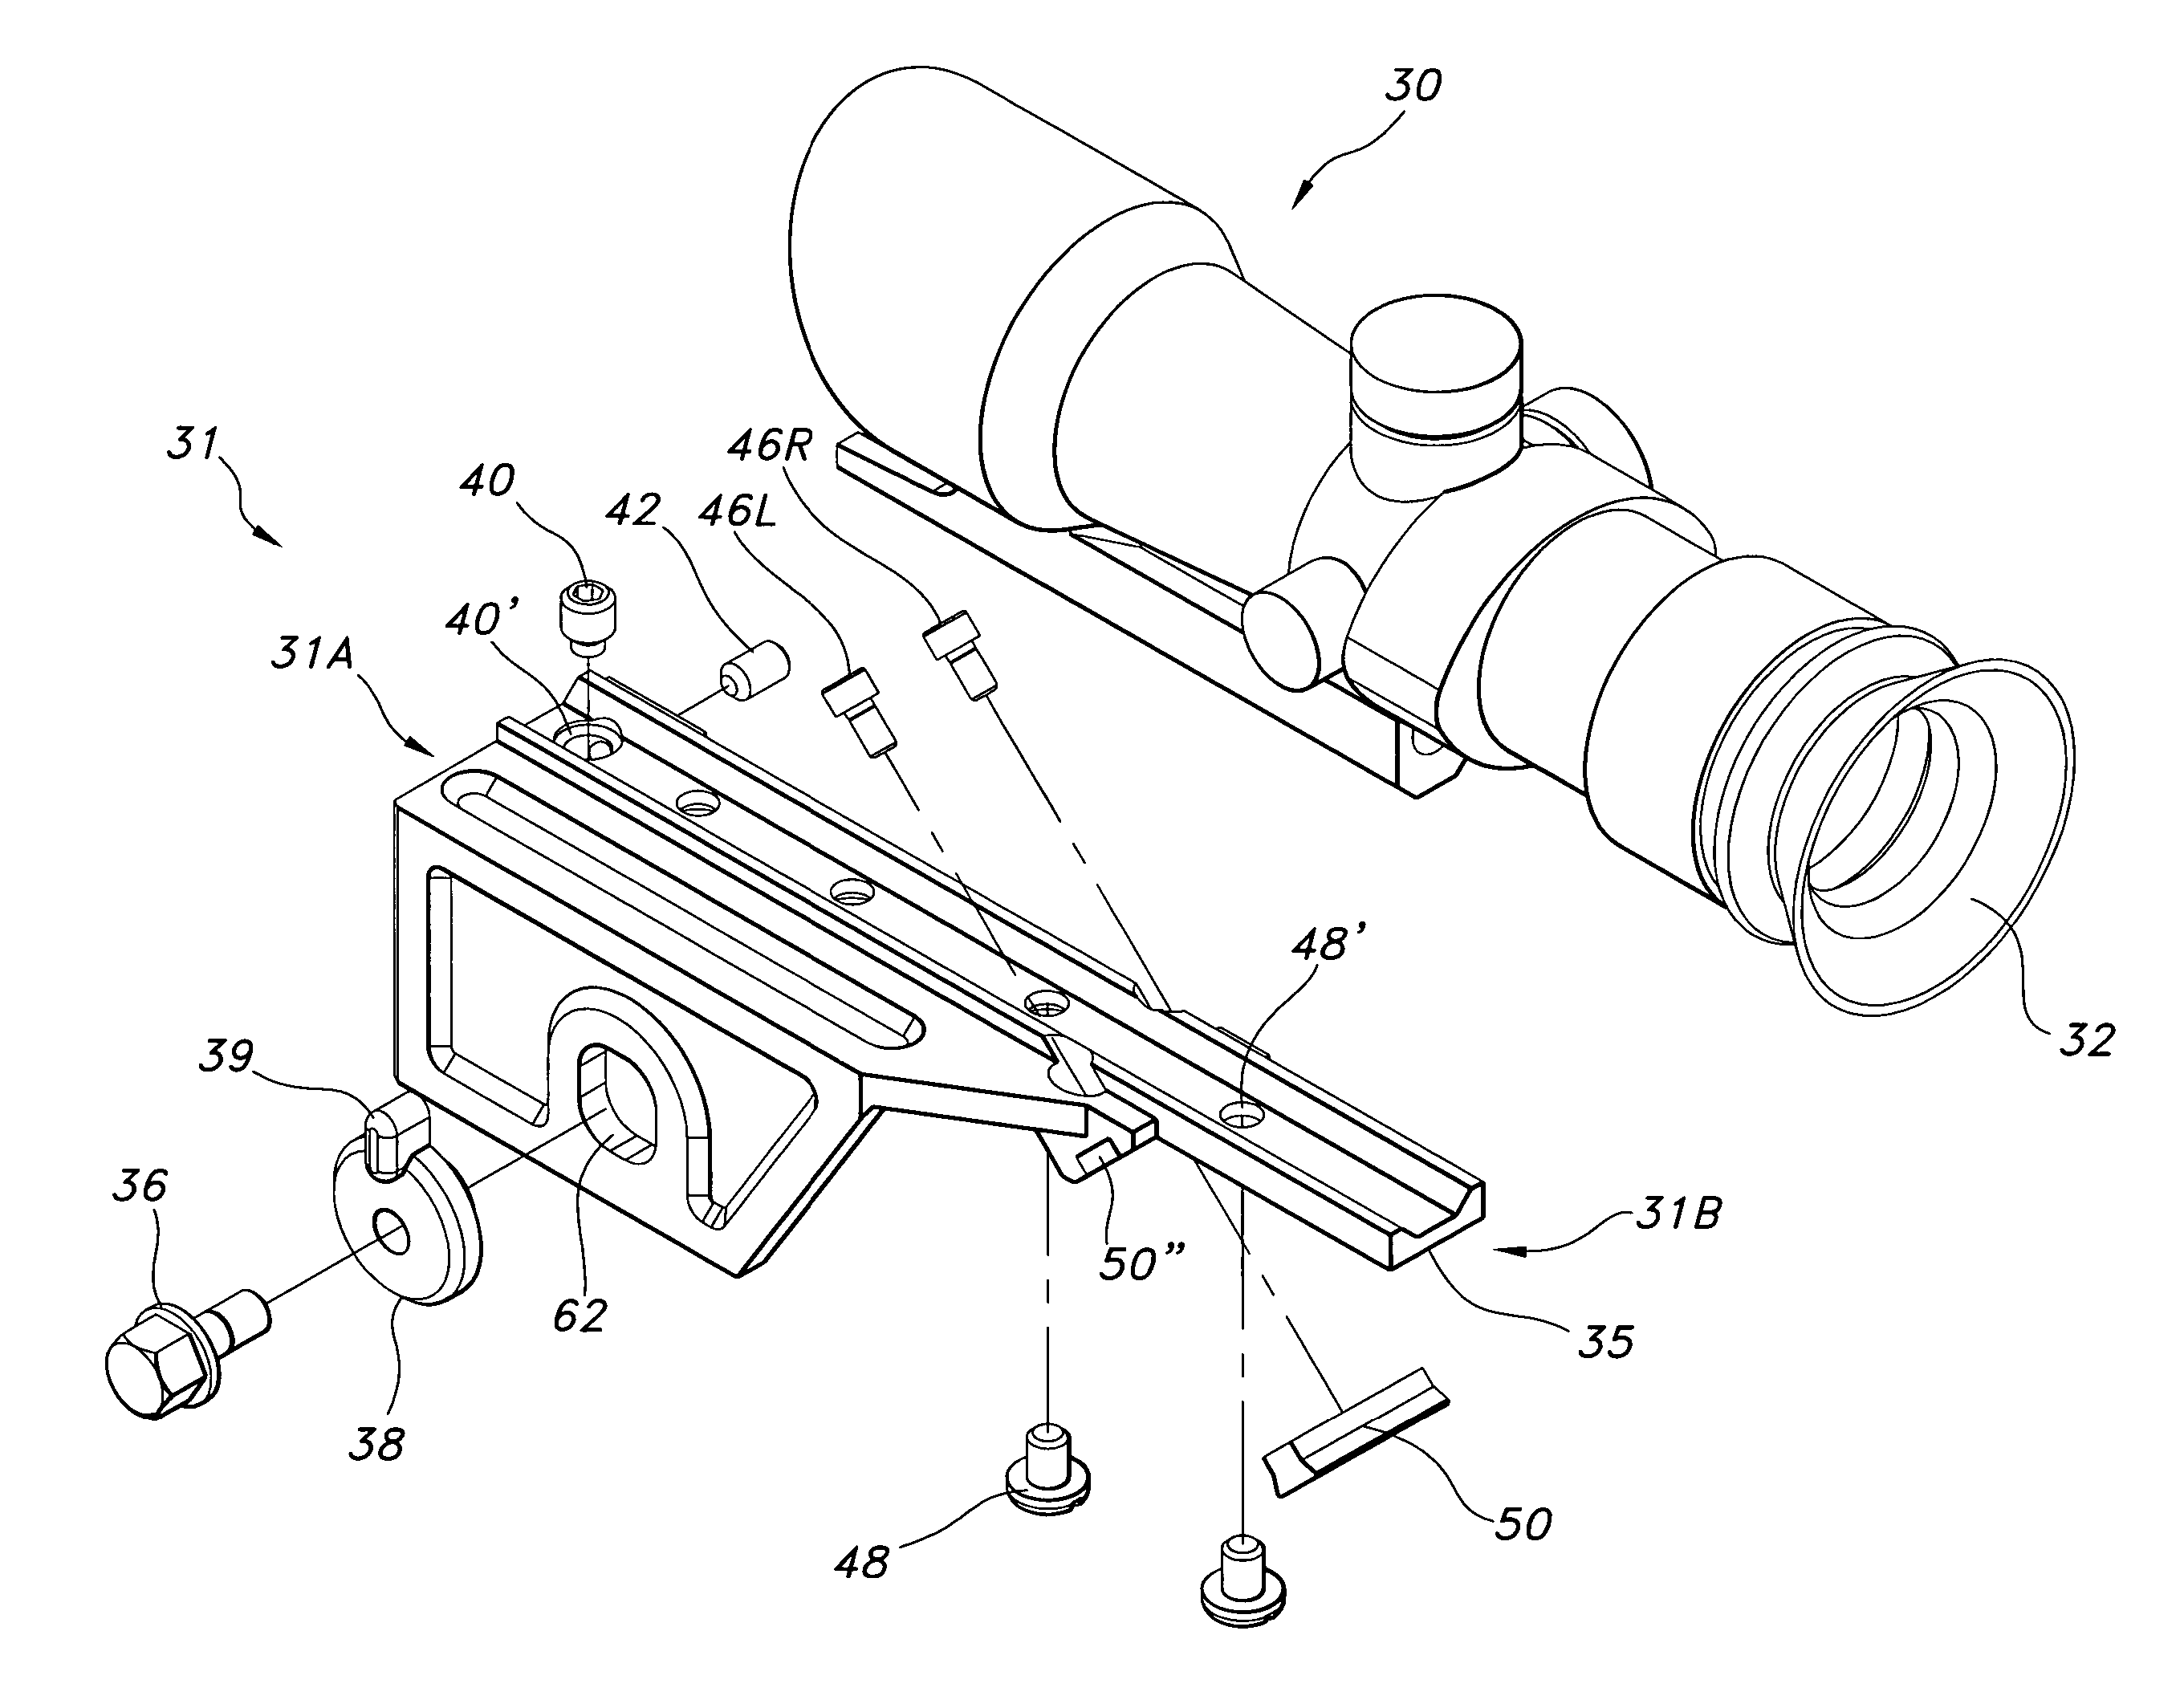 Removable optical sight mount adapted for use with M14, M1A and similar rifles and method for removably attaching an optical sight to a rifle